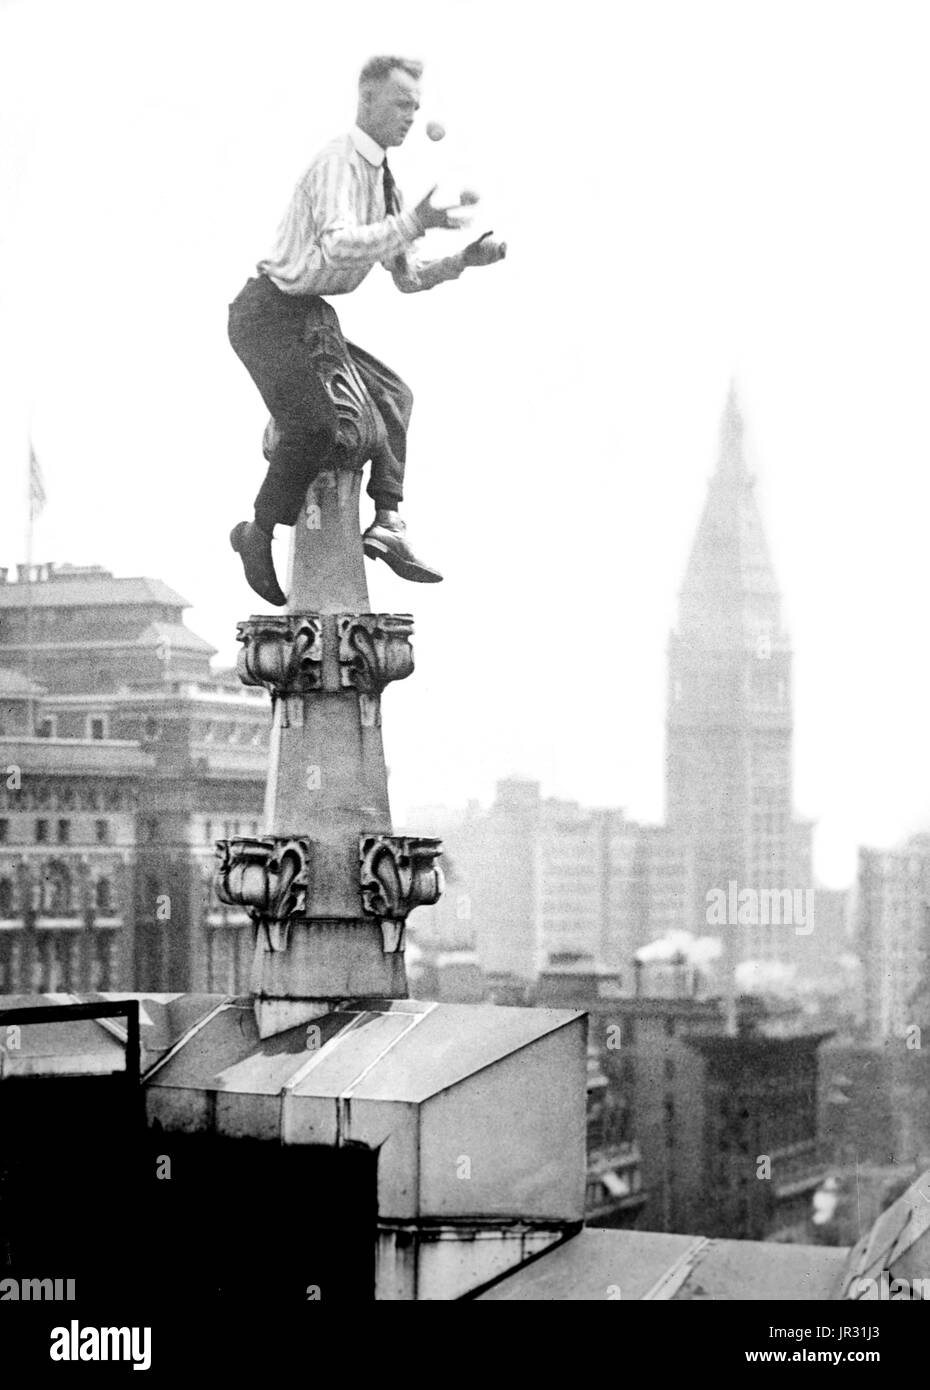 'Human Fly' Reynolds on a roof decoration in New York City. John 'Jammie' Reynolds (born 1890 or 91 - ?) was an American daredevil. Little is known about early life, what became of him once he stopped performing or even his real name. An acrobat and juggler, he was known by many names - Daredevil Johnny, Daredevil Jack, the Climbing Wonder, The Lizard, the Human Spider, and the Human Fly. A newspaper article from 1922 claims he began performing at the age six in Buffalo, balancing on one foot from a flagpole 140 feet in the air. His first major stunt came at age 12 when he climbed up the side  Stock Photo